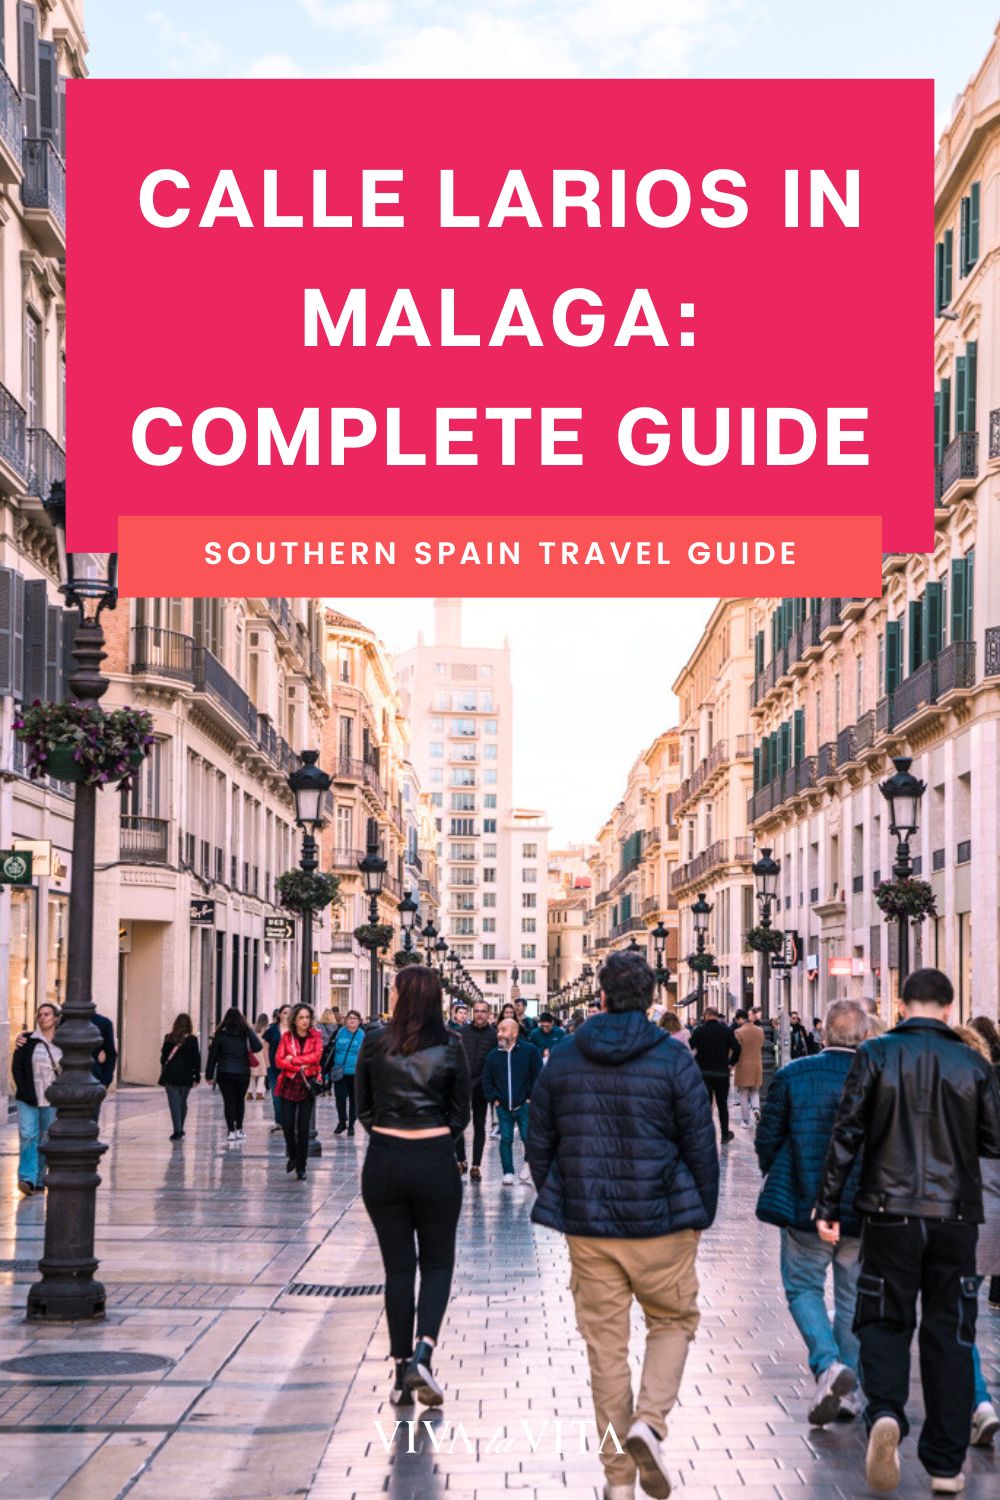 pinterest image showing the Calle Larios in Malaga, Southern Spain with a headline: calle Larios in Malaga, Complete Guide - Southern Spain travel guide